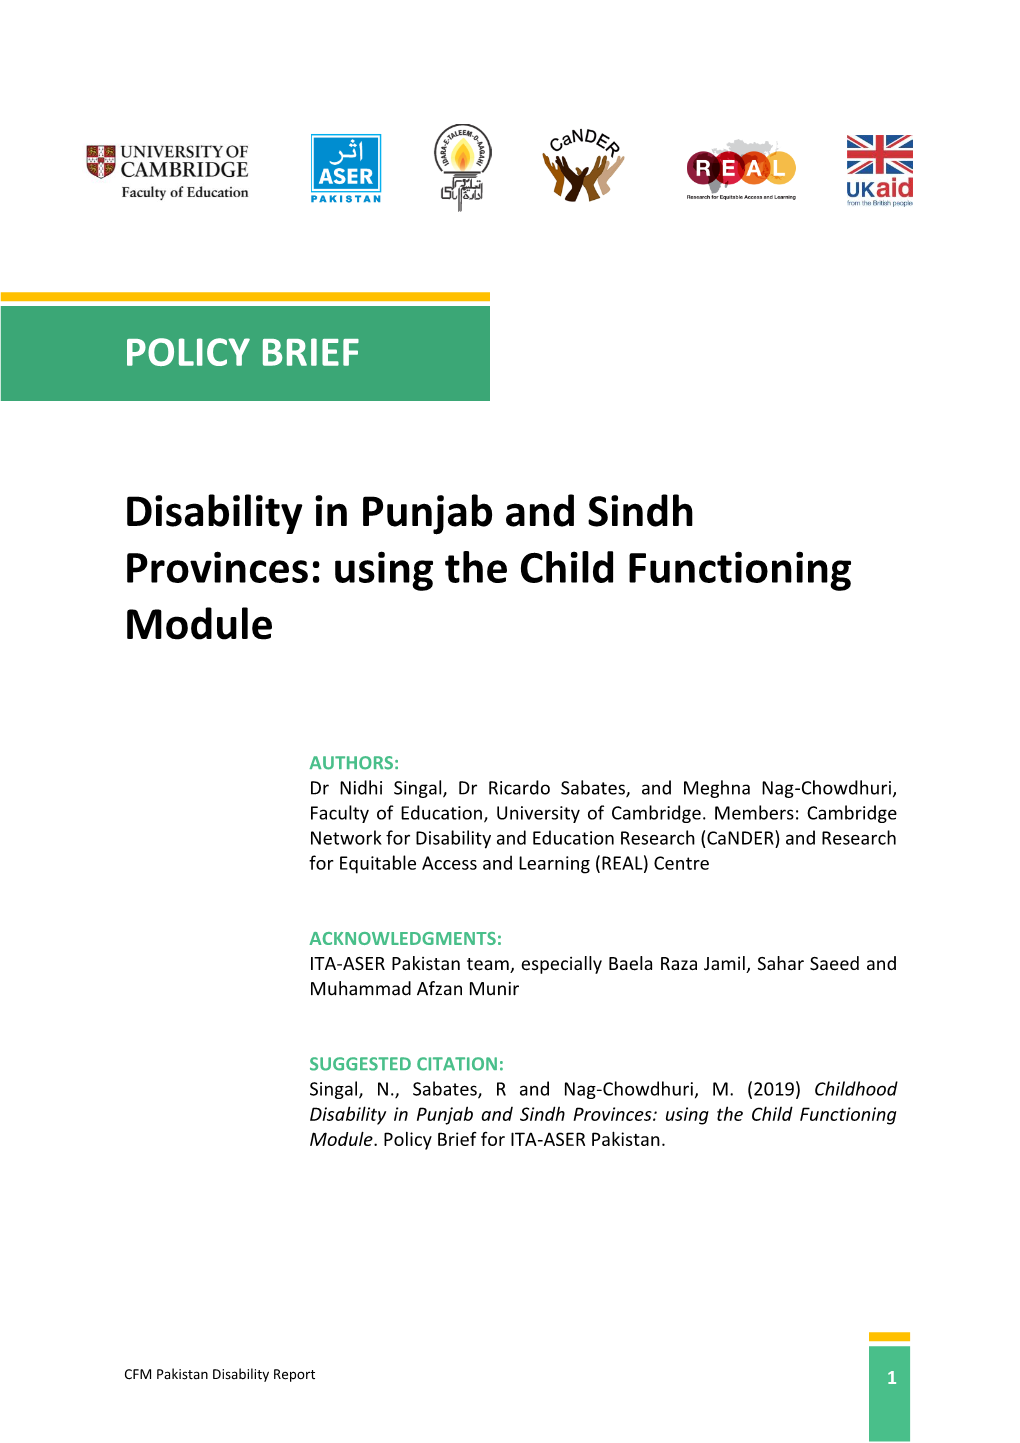 Disability in Punjab and Sindh Provinces: Using the Child Functioning Module